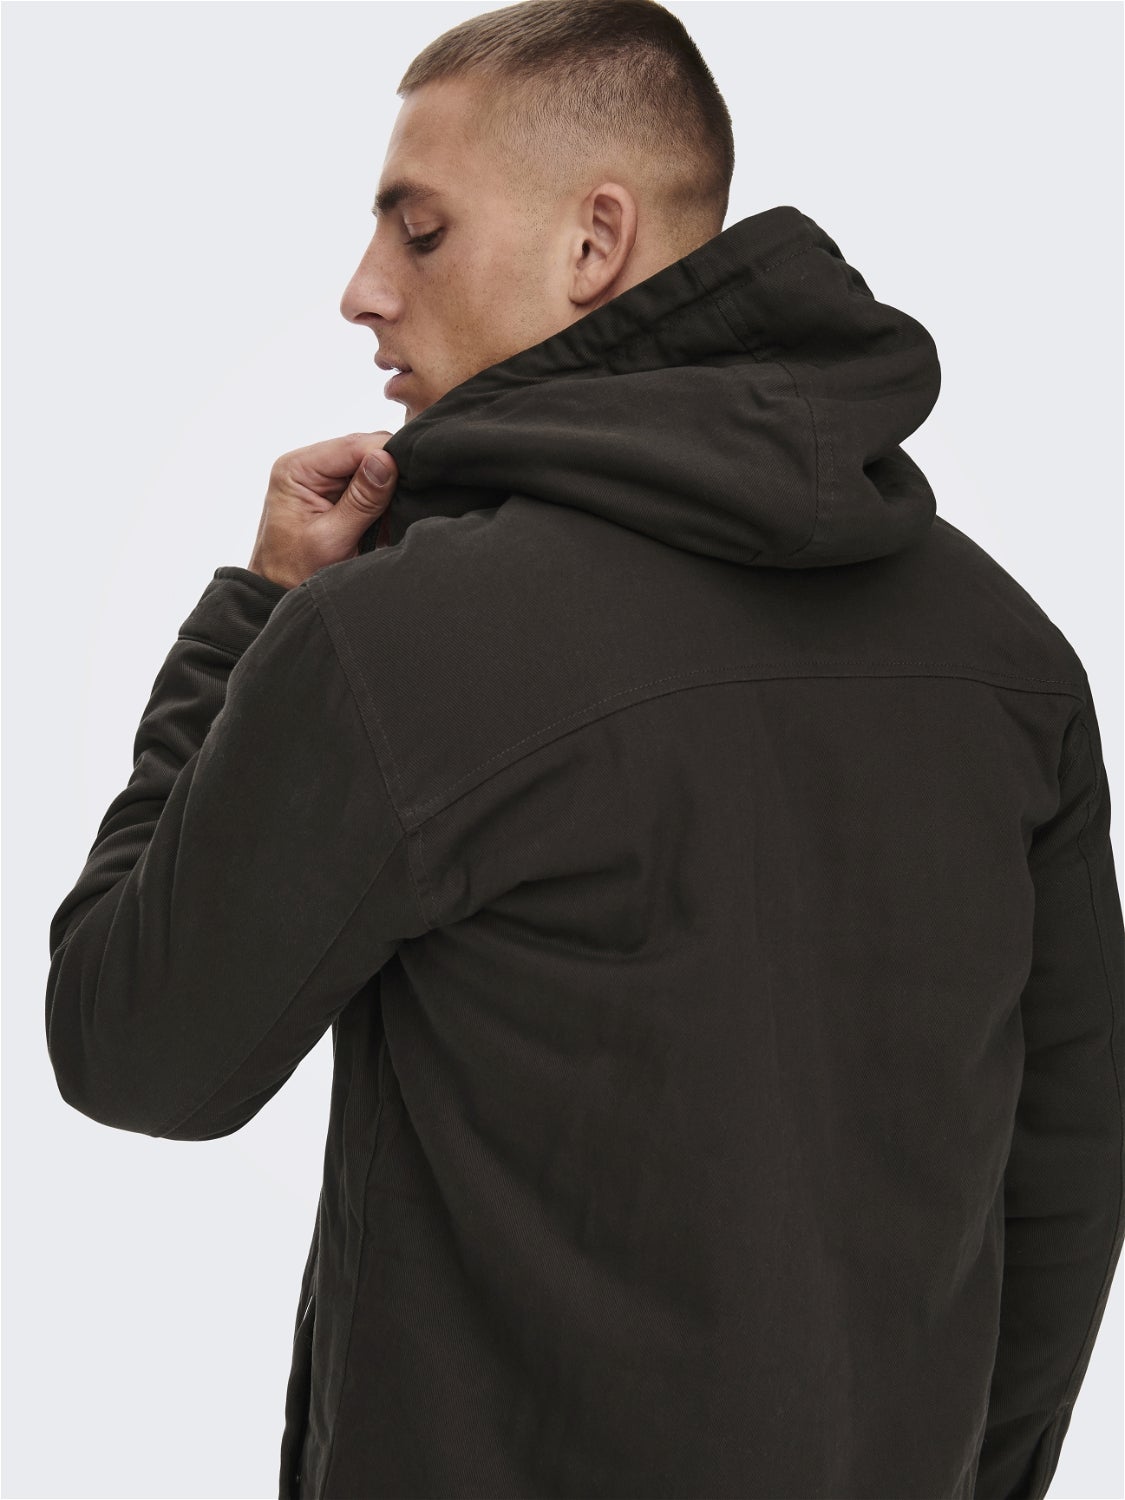 Hood with string regulation Buttoned cuffs Jacket with 30 